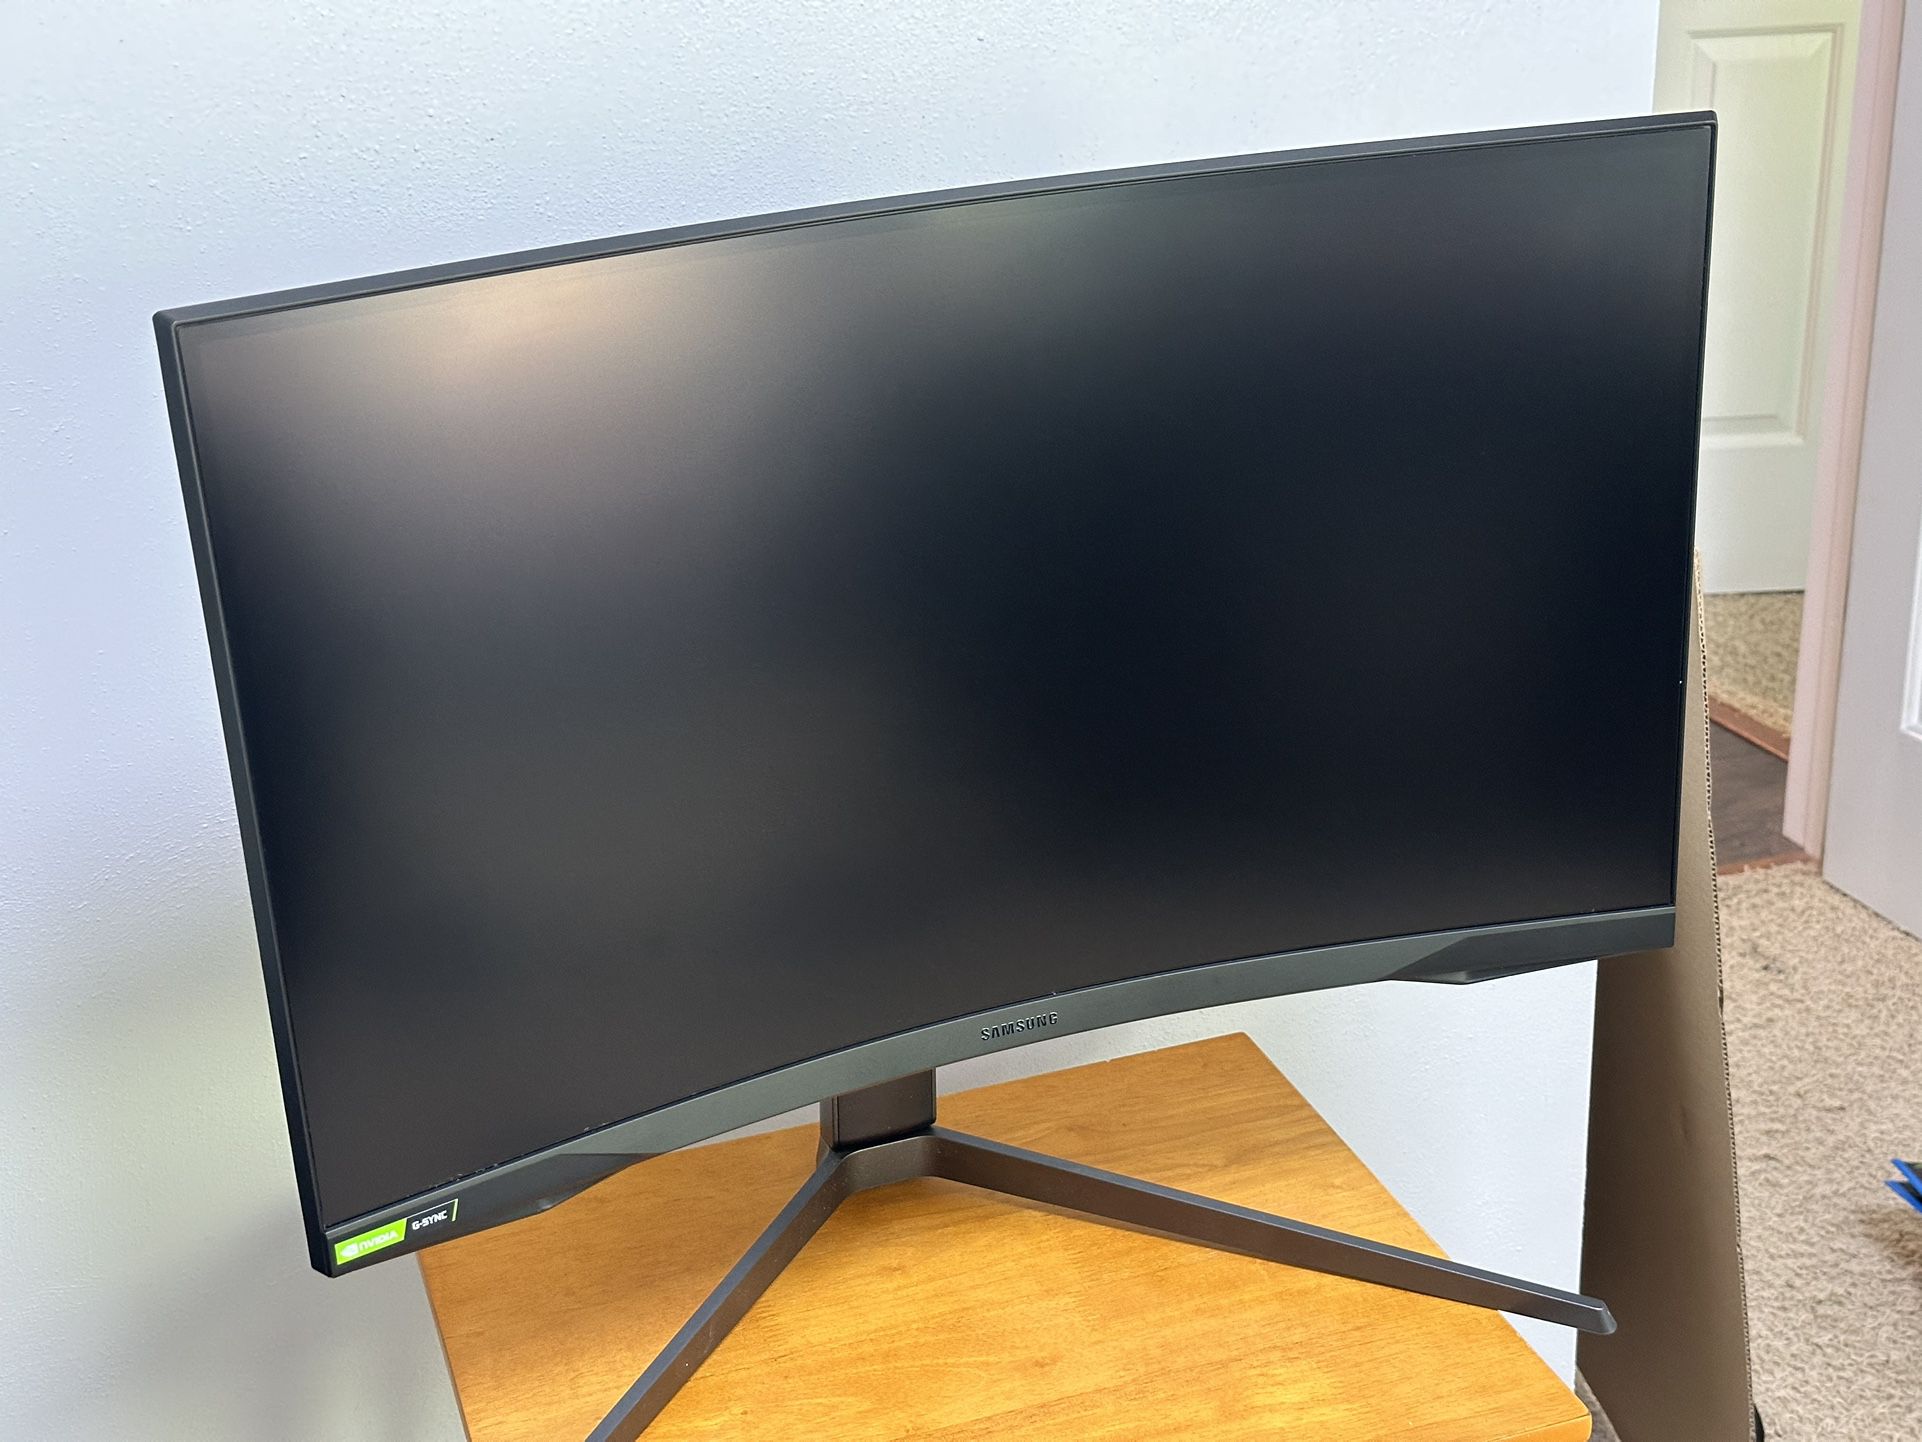 Samsung 27” G7 Curved Gaming Monitor - 240hz 2560x1440